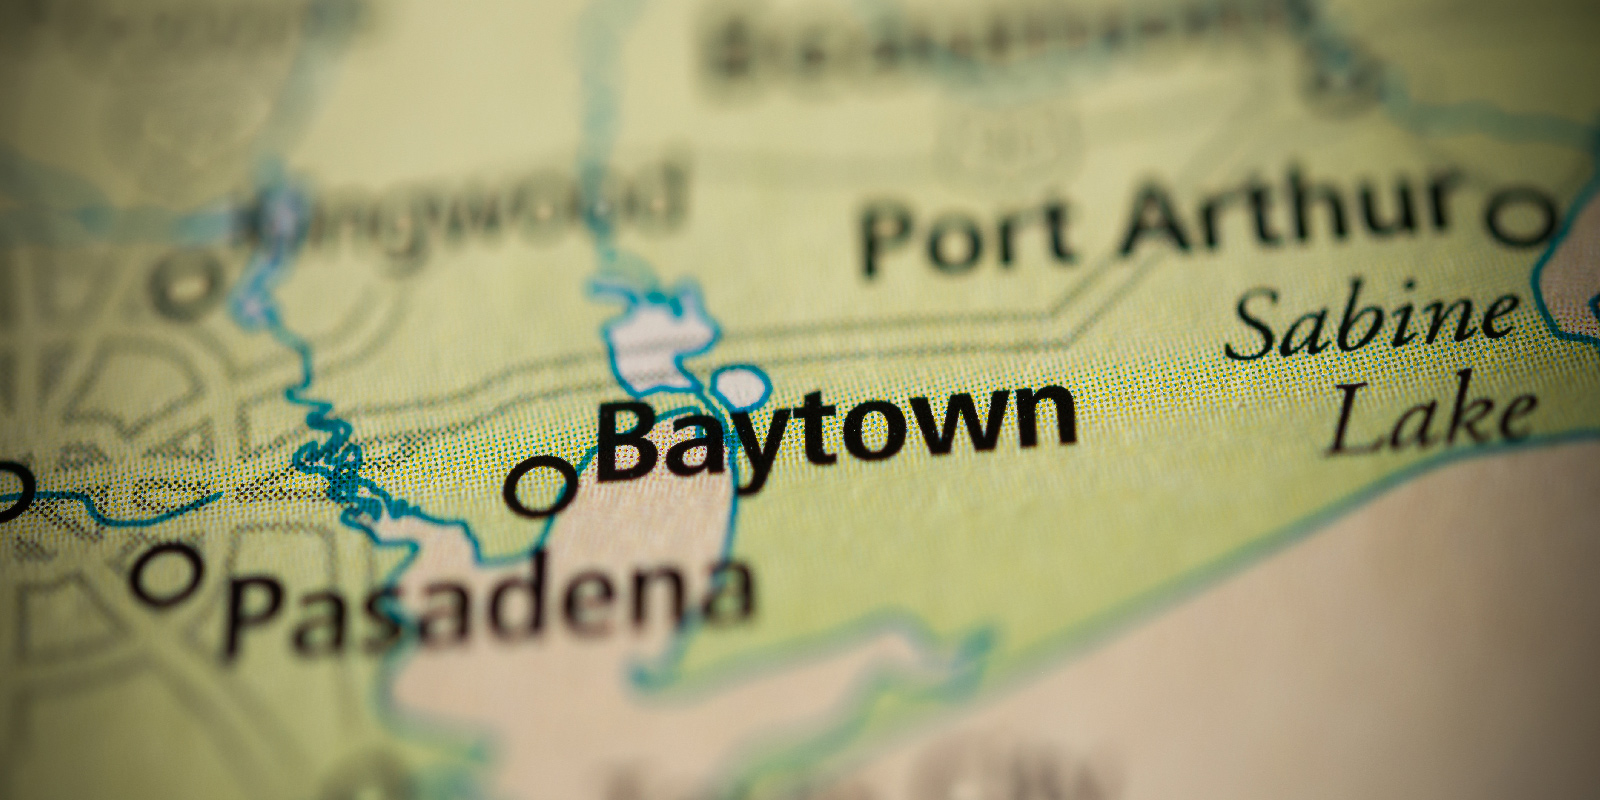 A map showing the city of Baytown